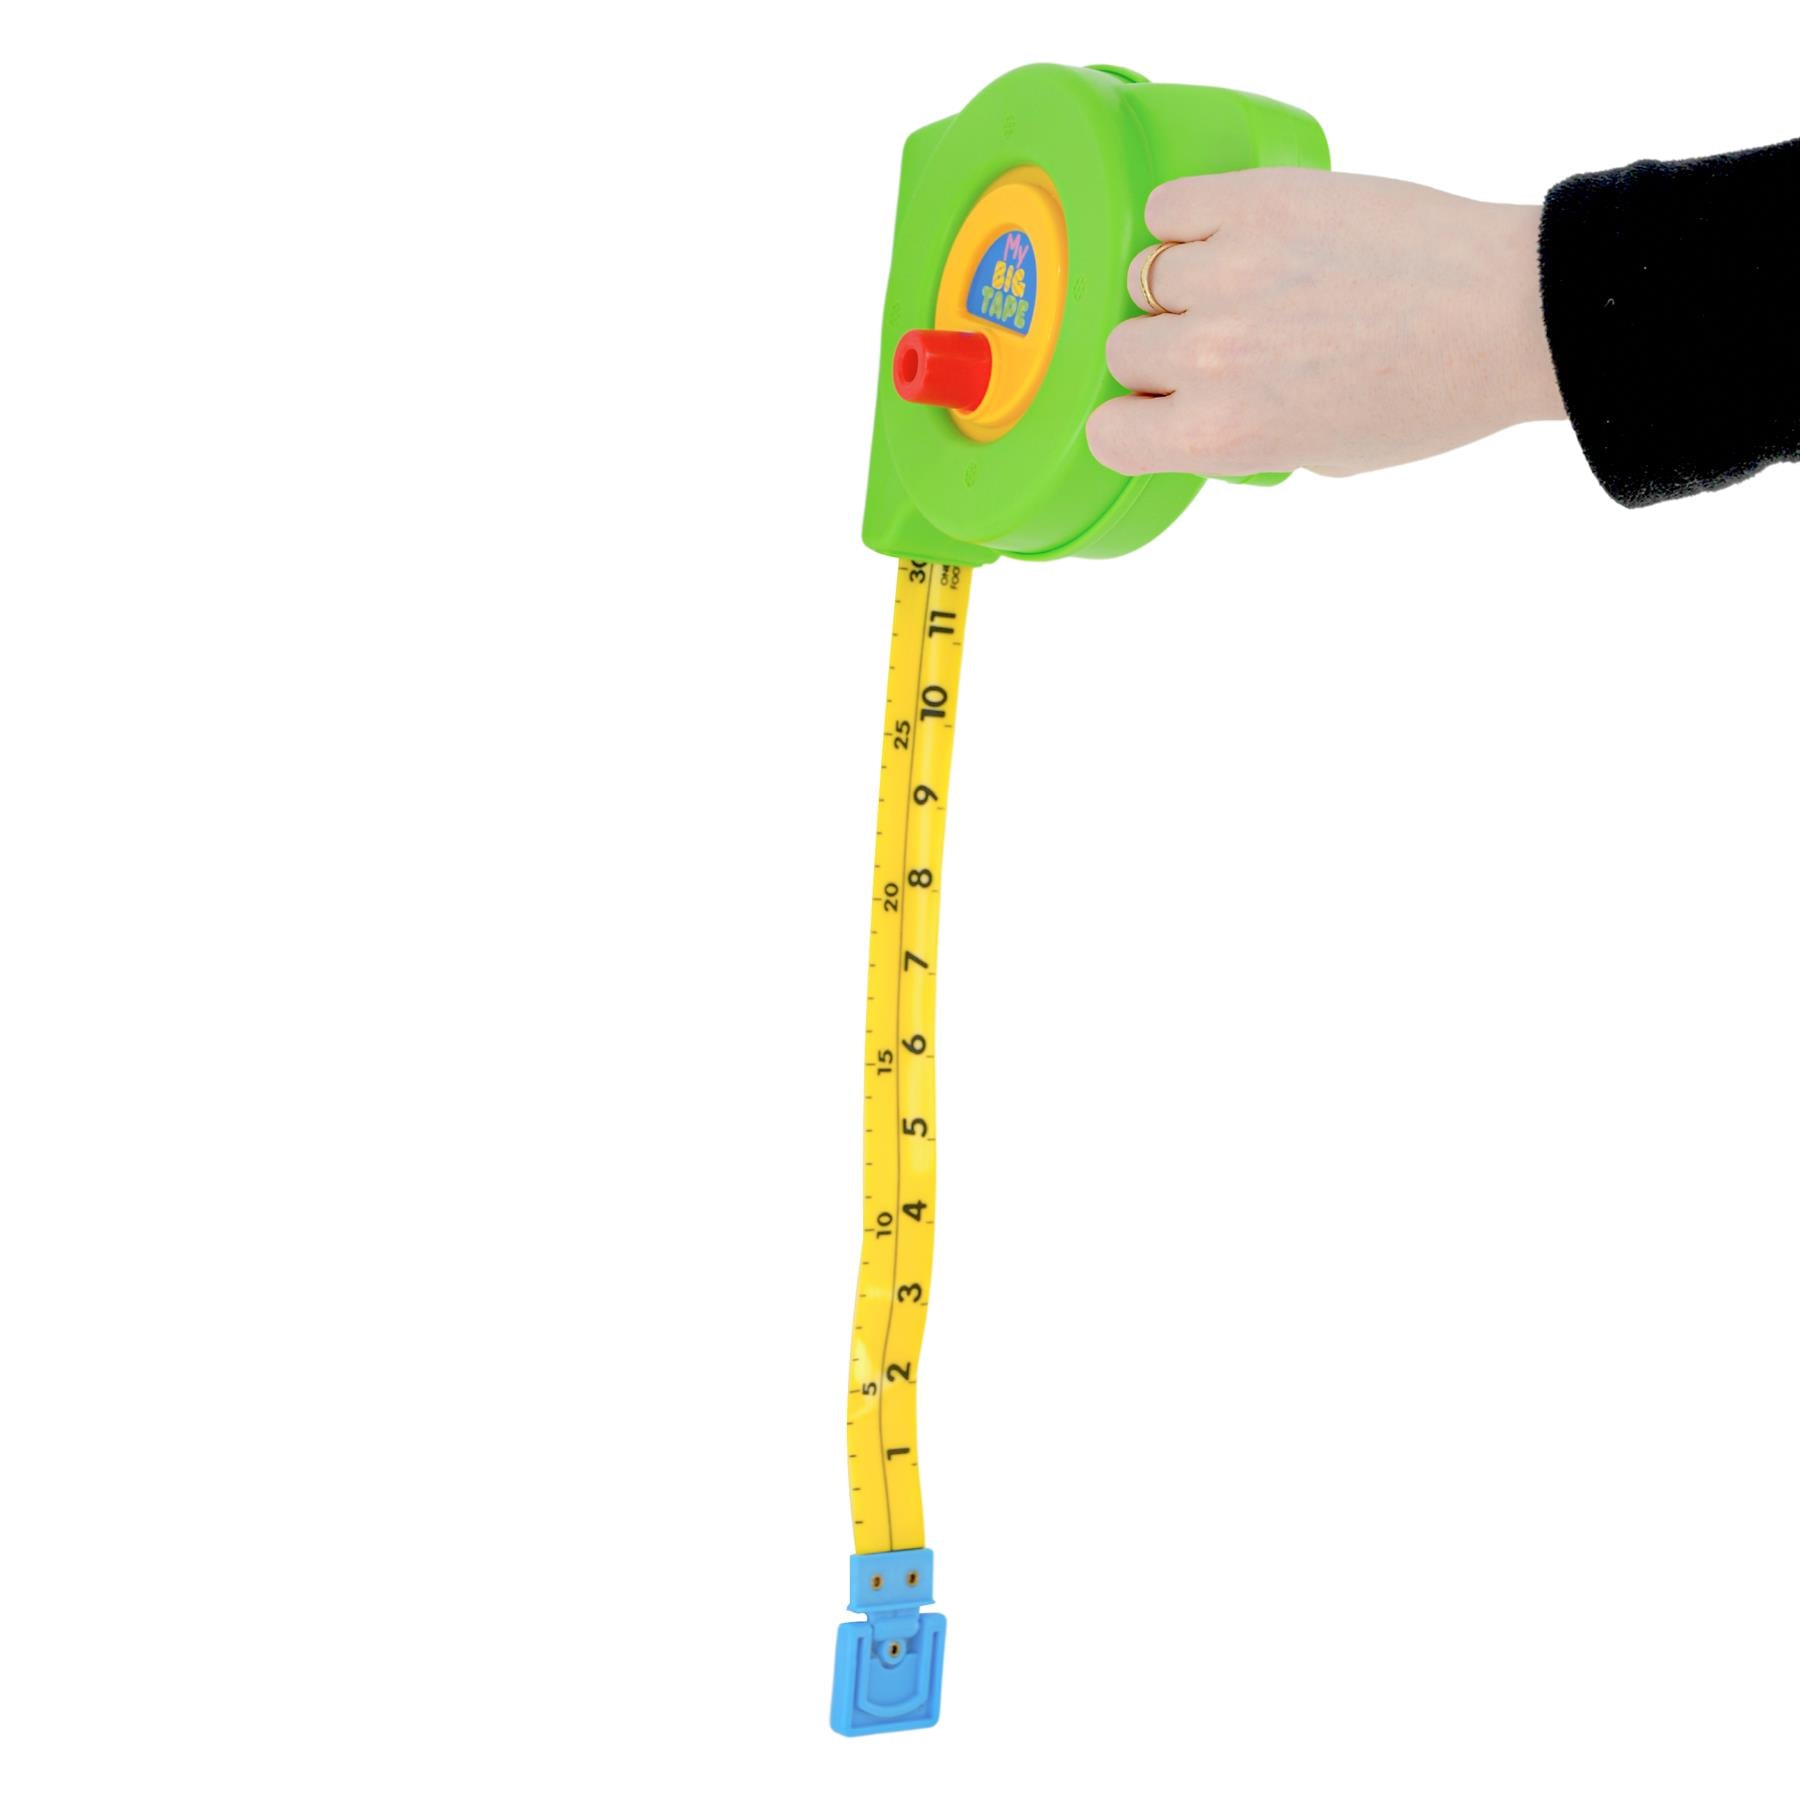 Tape Measure Toy - Green - Tape Measure Toy - Kids Tape Measure Toy -  Plastic - The Magic Toy Shop